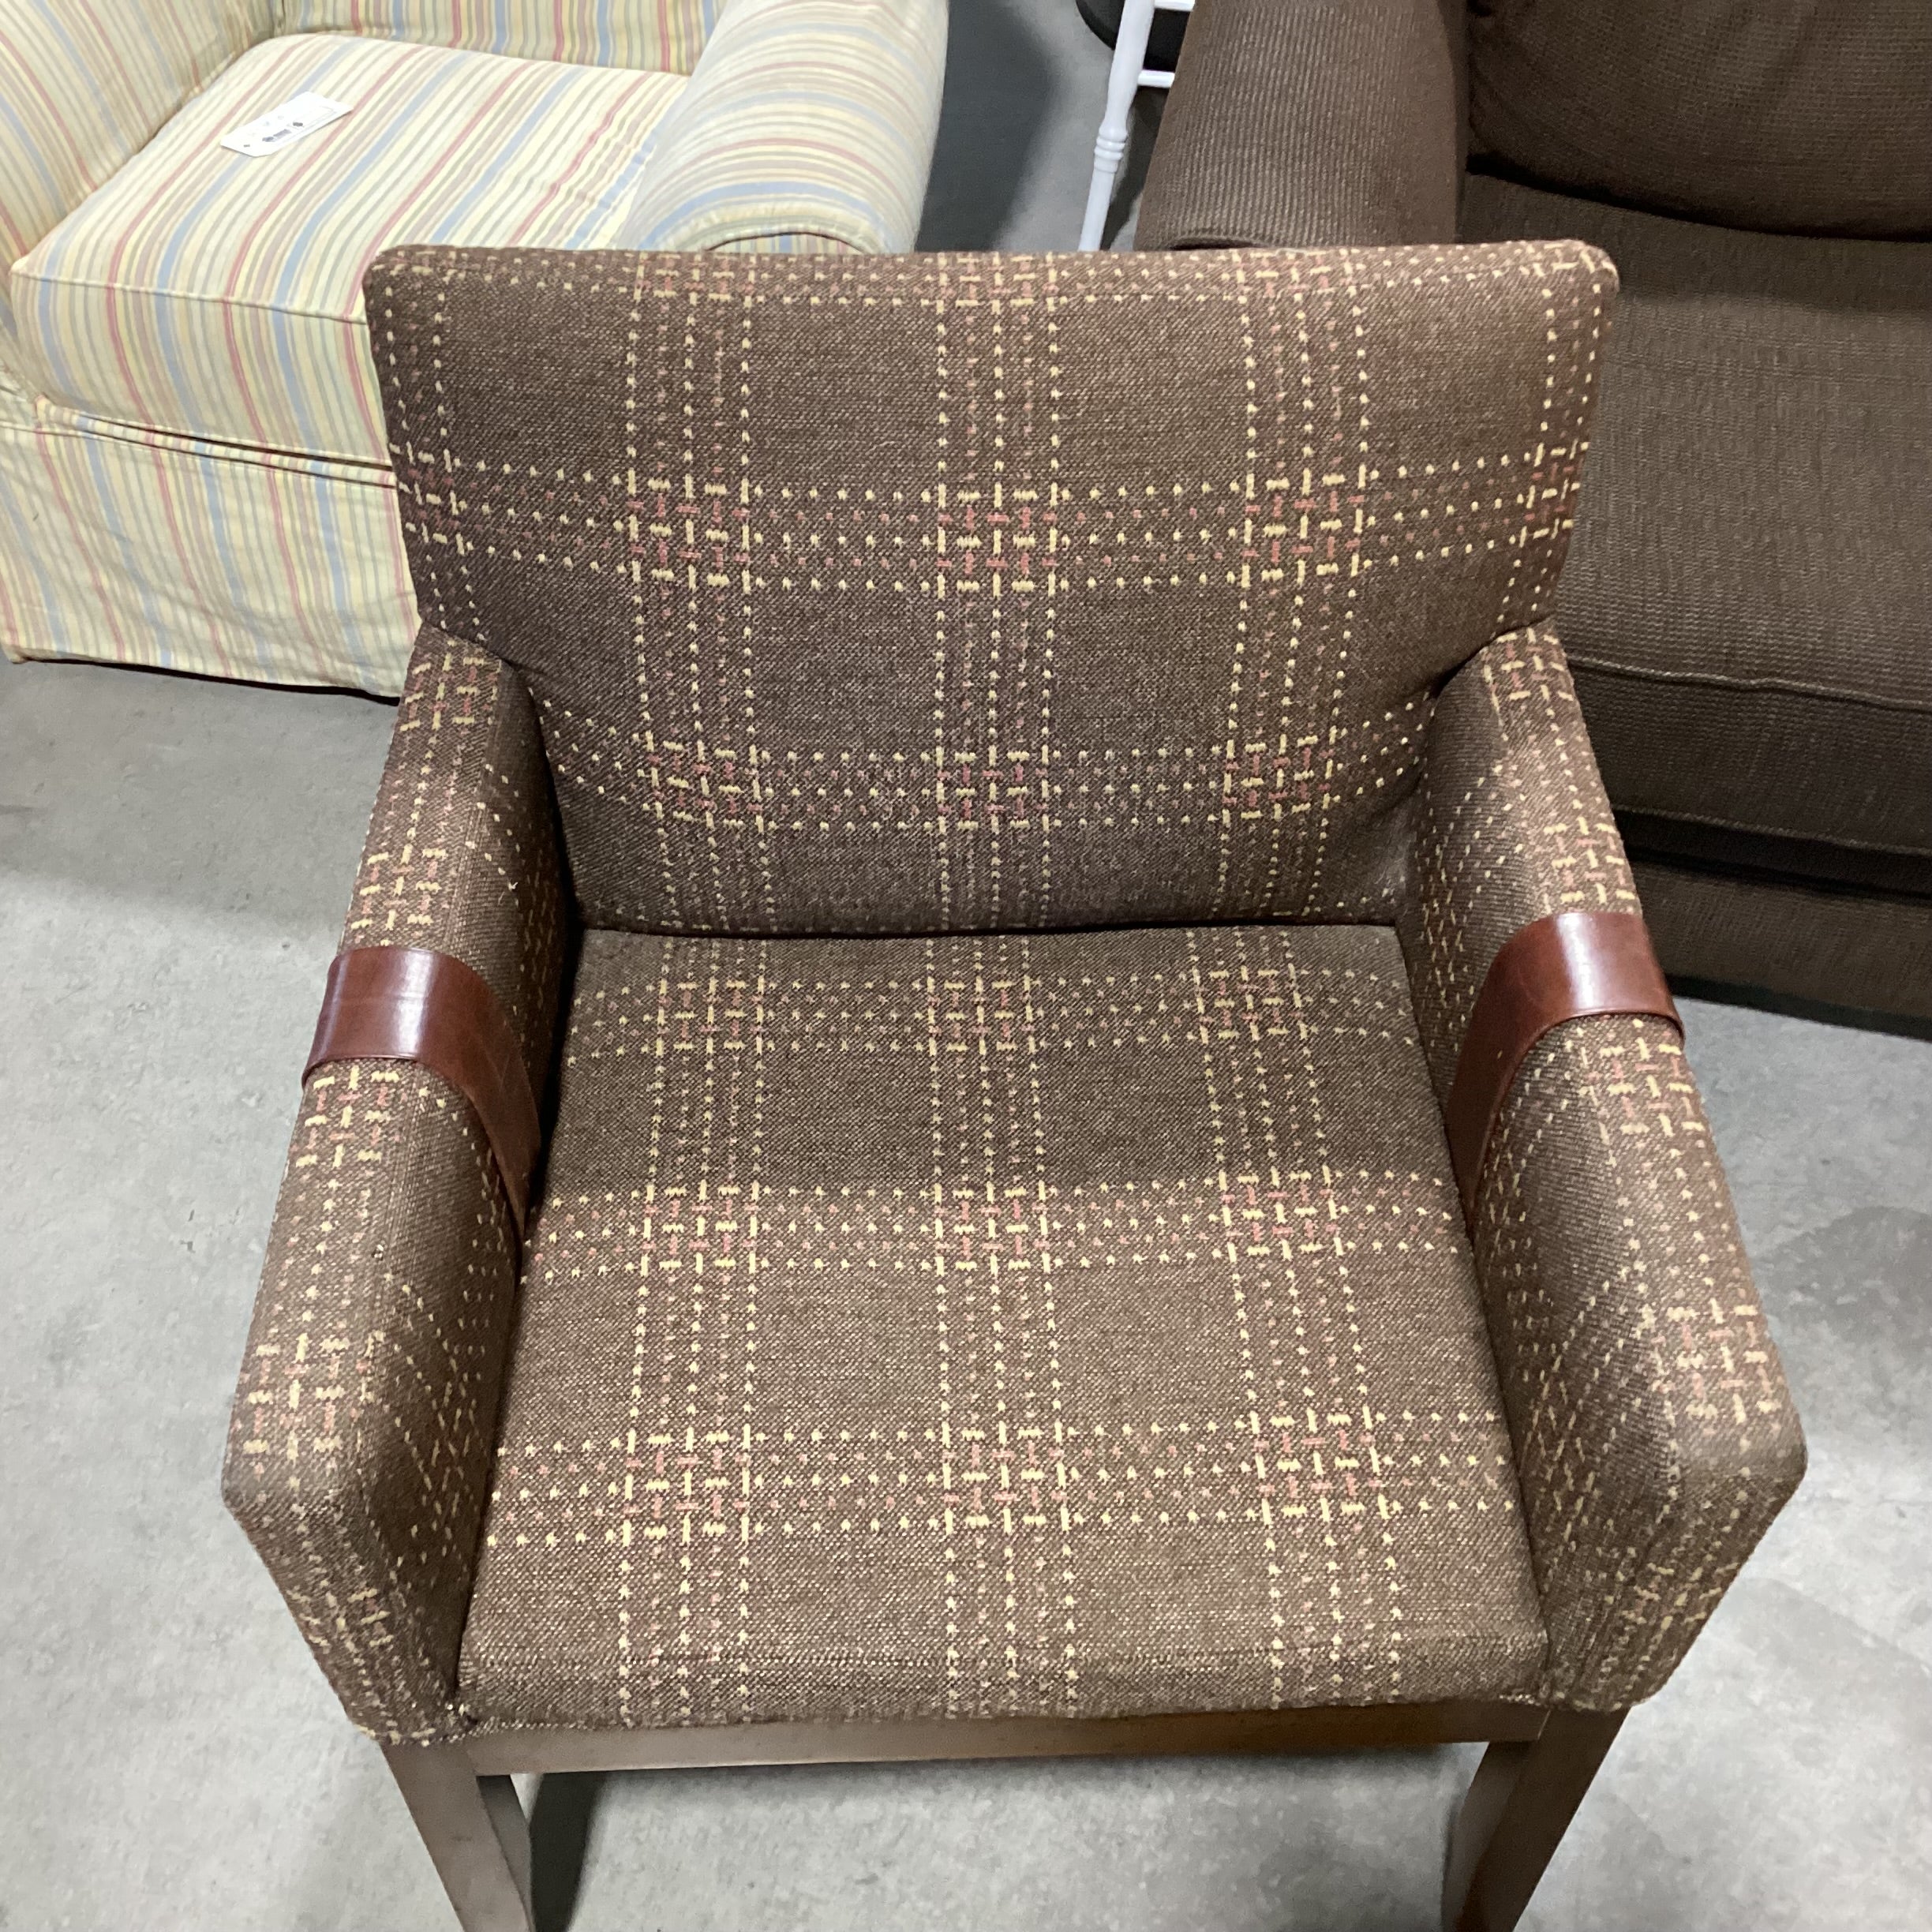 Brown Woven Plaid Leather Belt Accent Chair 28"x 25"x 35"